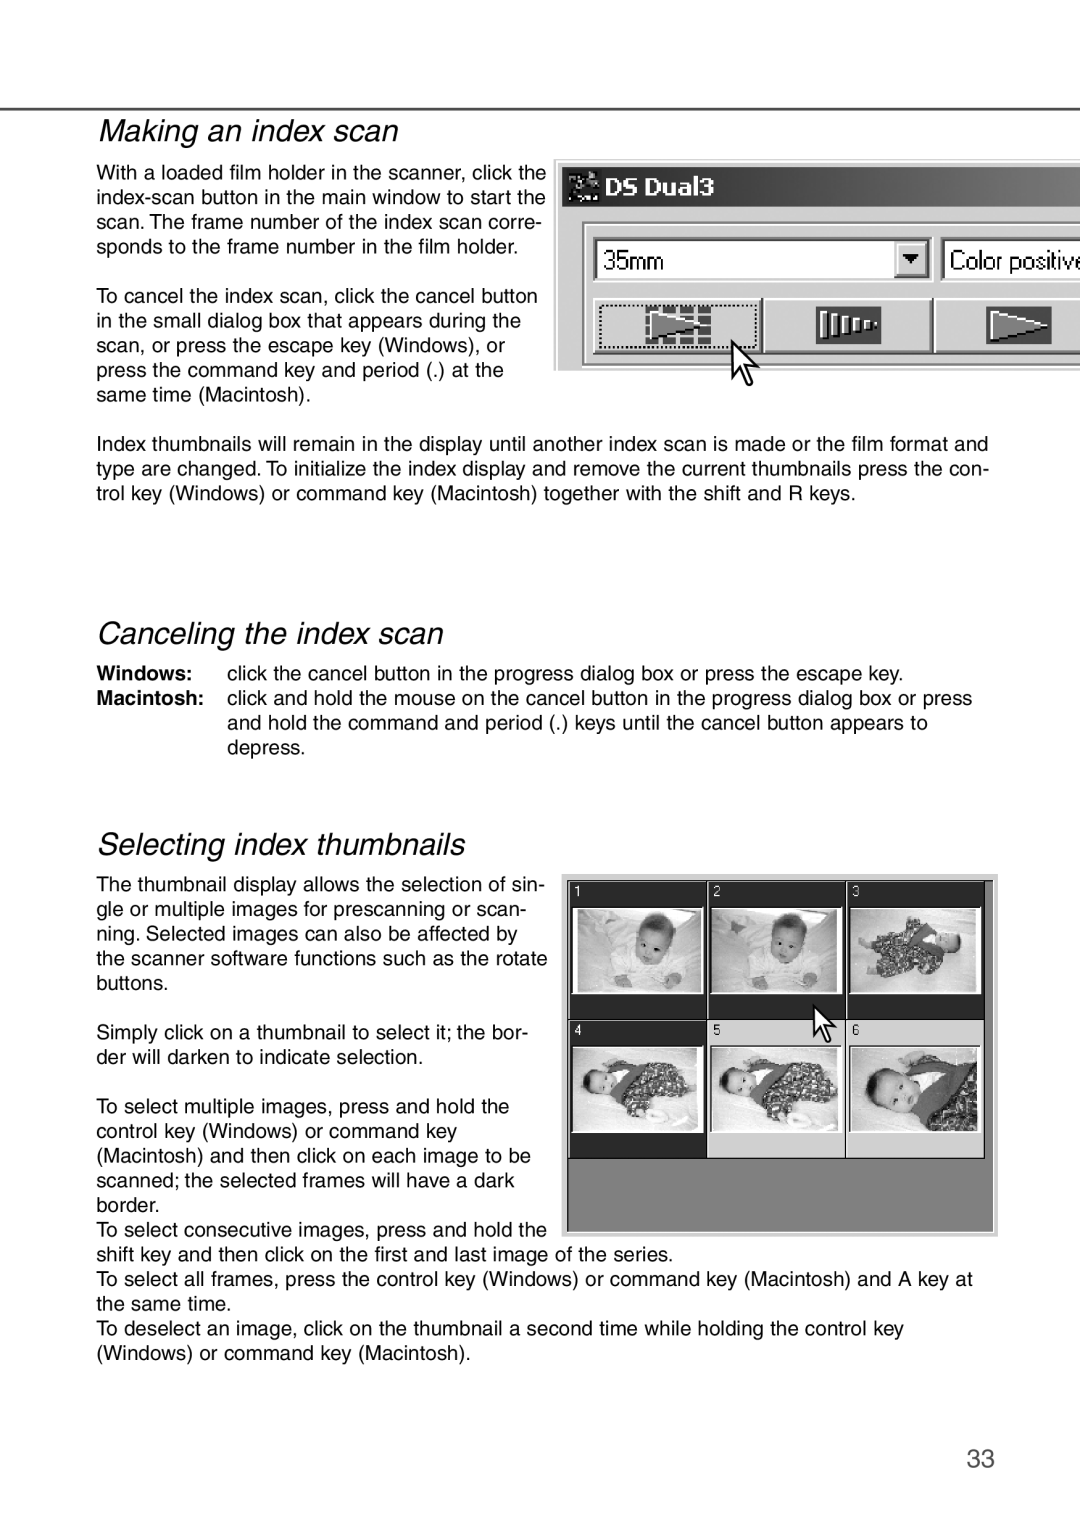 Konica Minolta AF-2840 instruction manual Making an index scan, Canceling the index scan, Selecting index thumbnails 